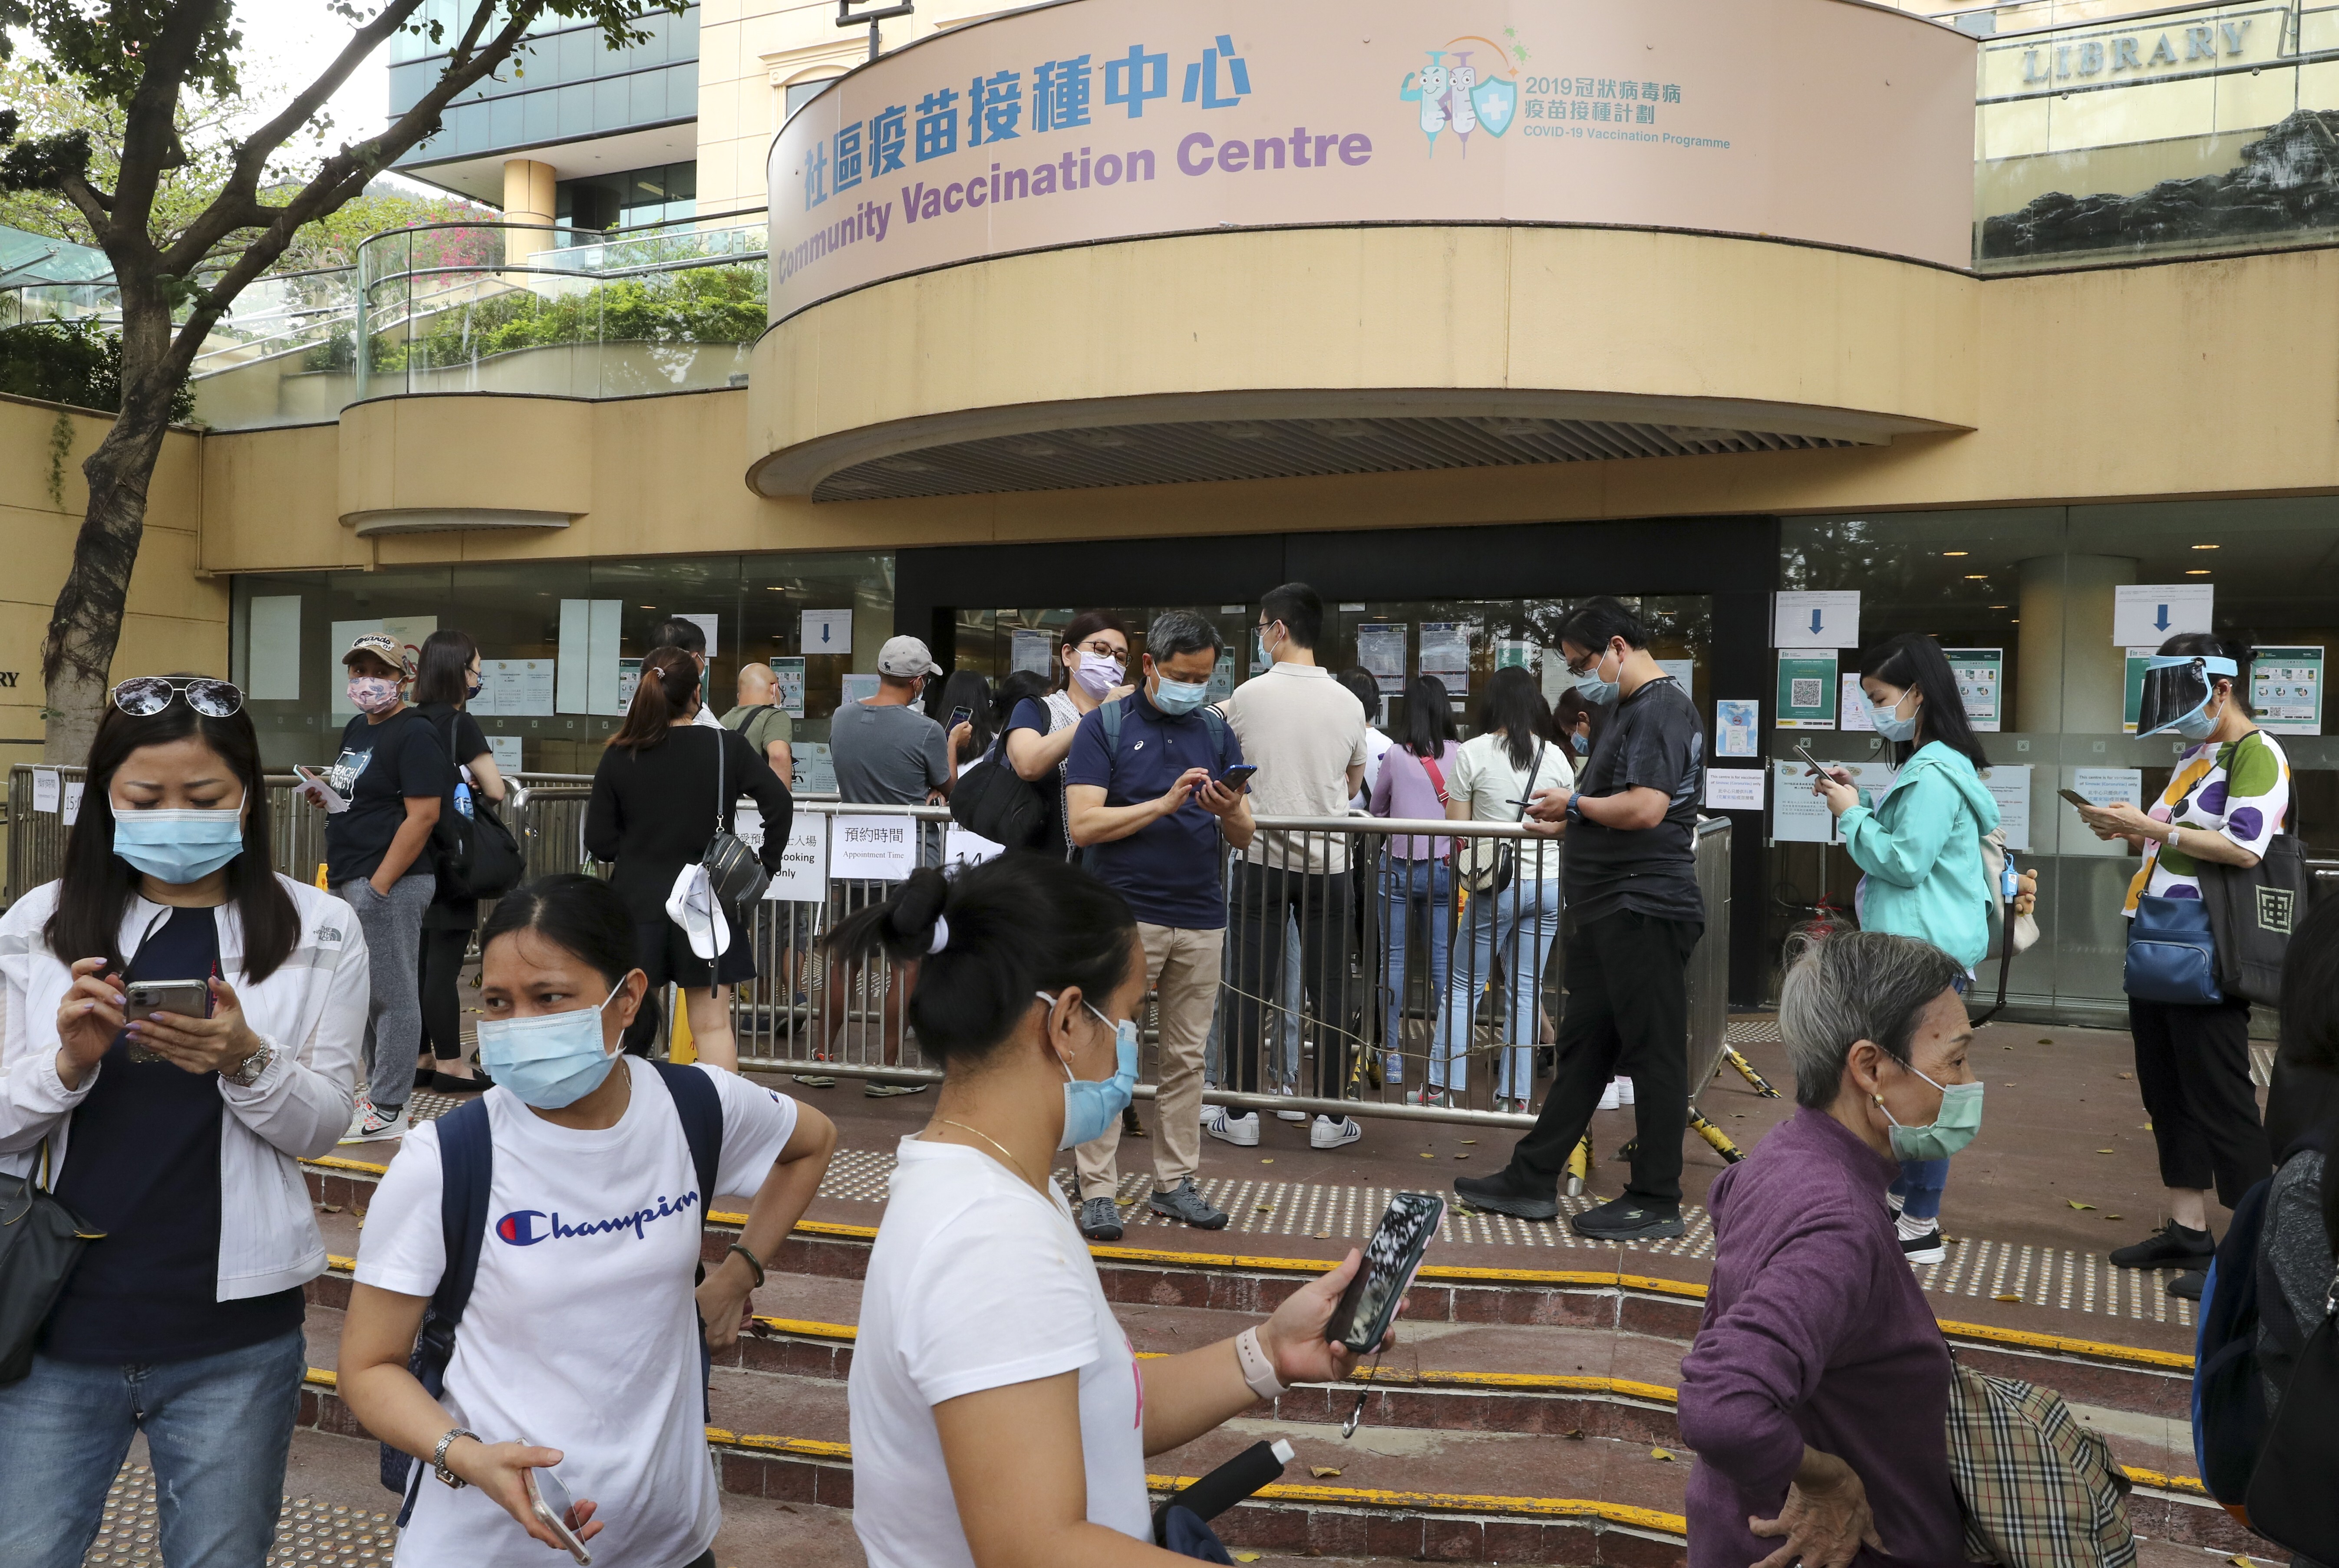 The government has expanded the coronavirus vaccination scheme, allowing people age 16-30 to receive the jab. Photo: SCMP / Edmond So